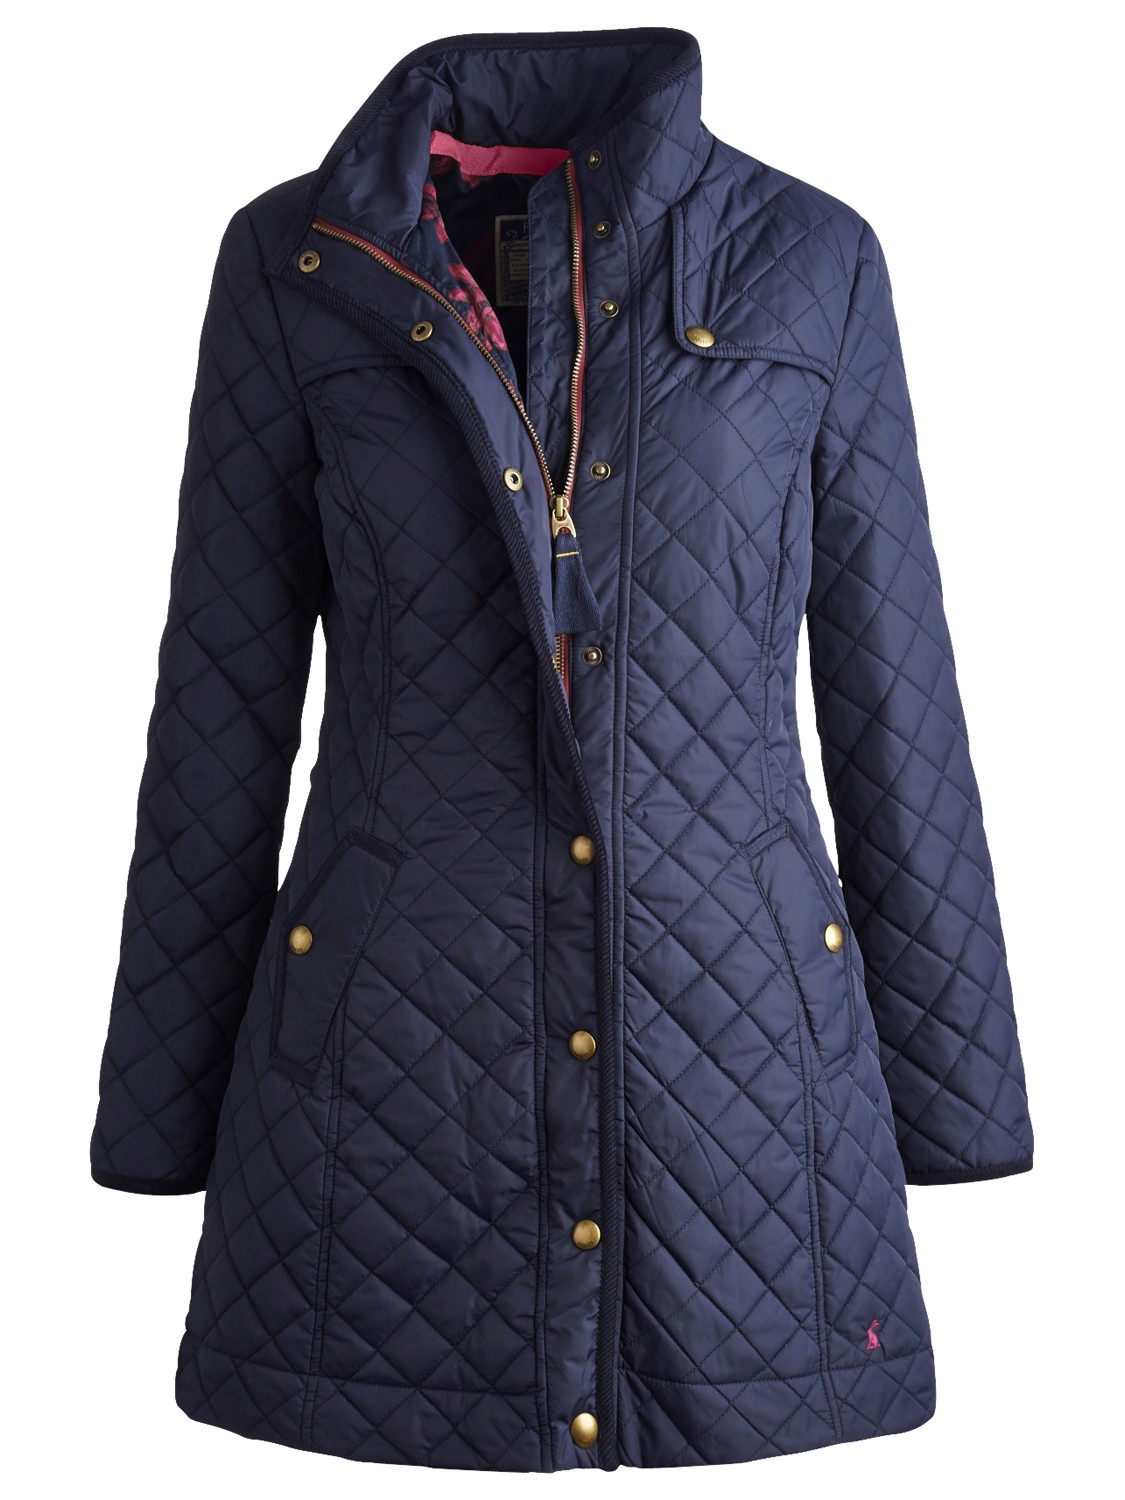 Joules Fairhurst Quilted Jacket in Marine Navy (Blue) - Lyst